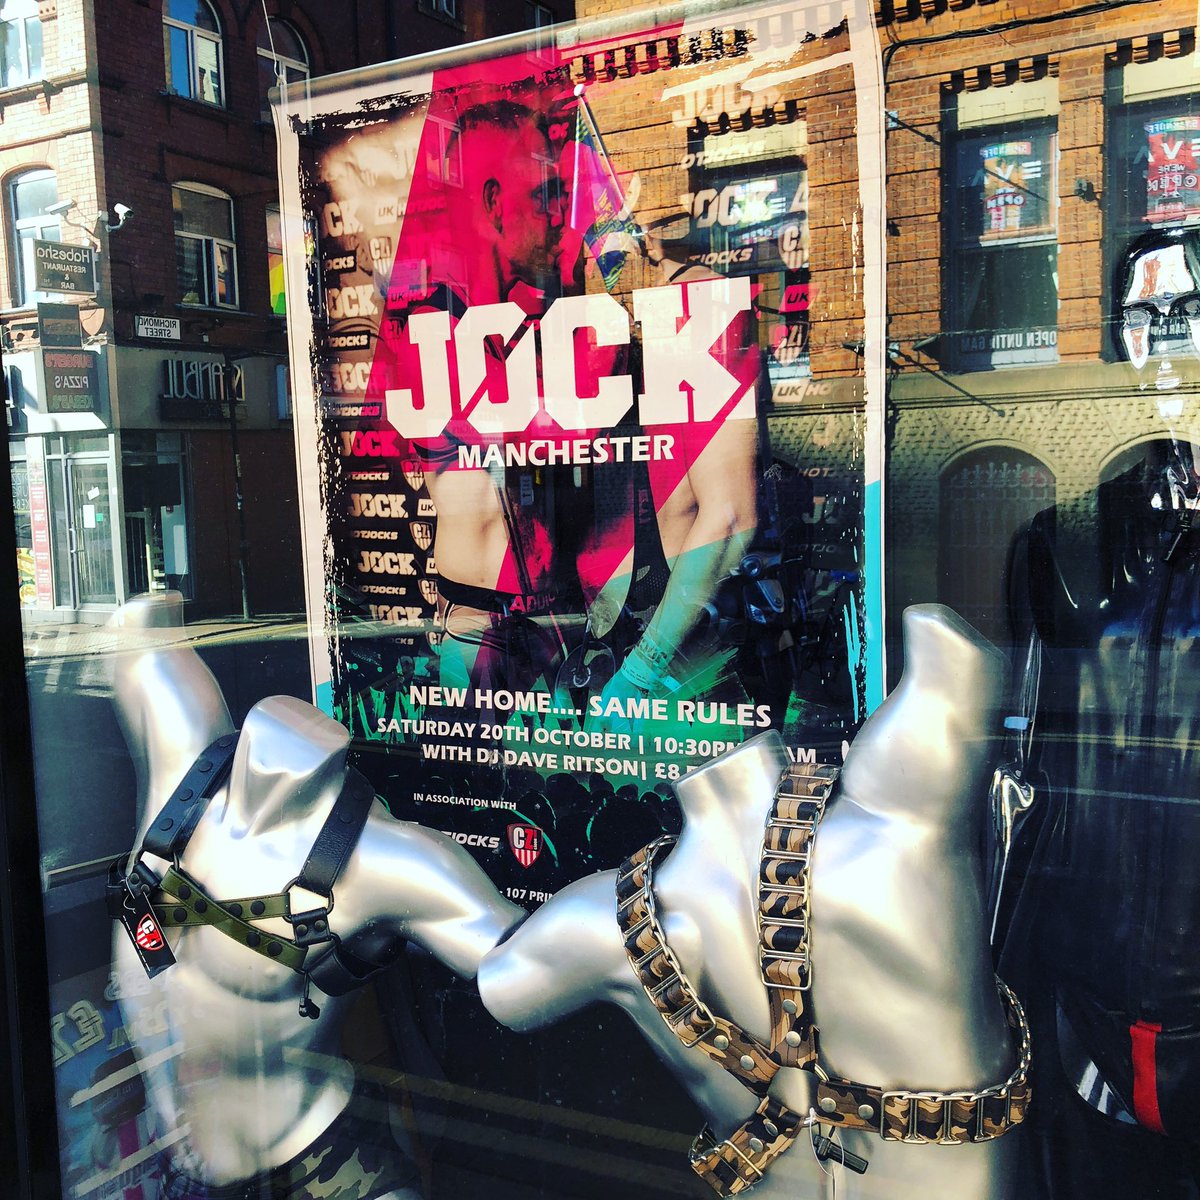 JOCK Manchester promo looking amazing in the window at @czmanchester thanks guys! Look out for our little street parade of hotties this Saturday night